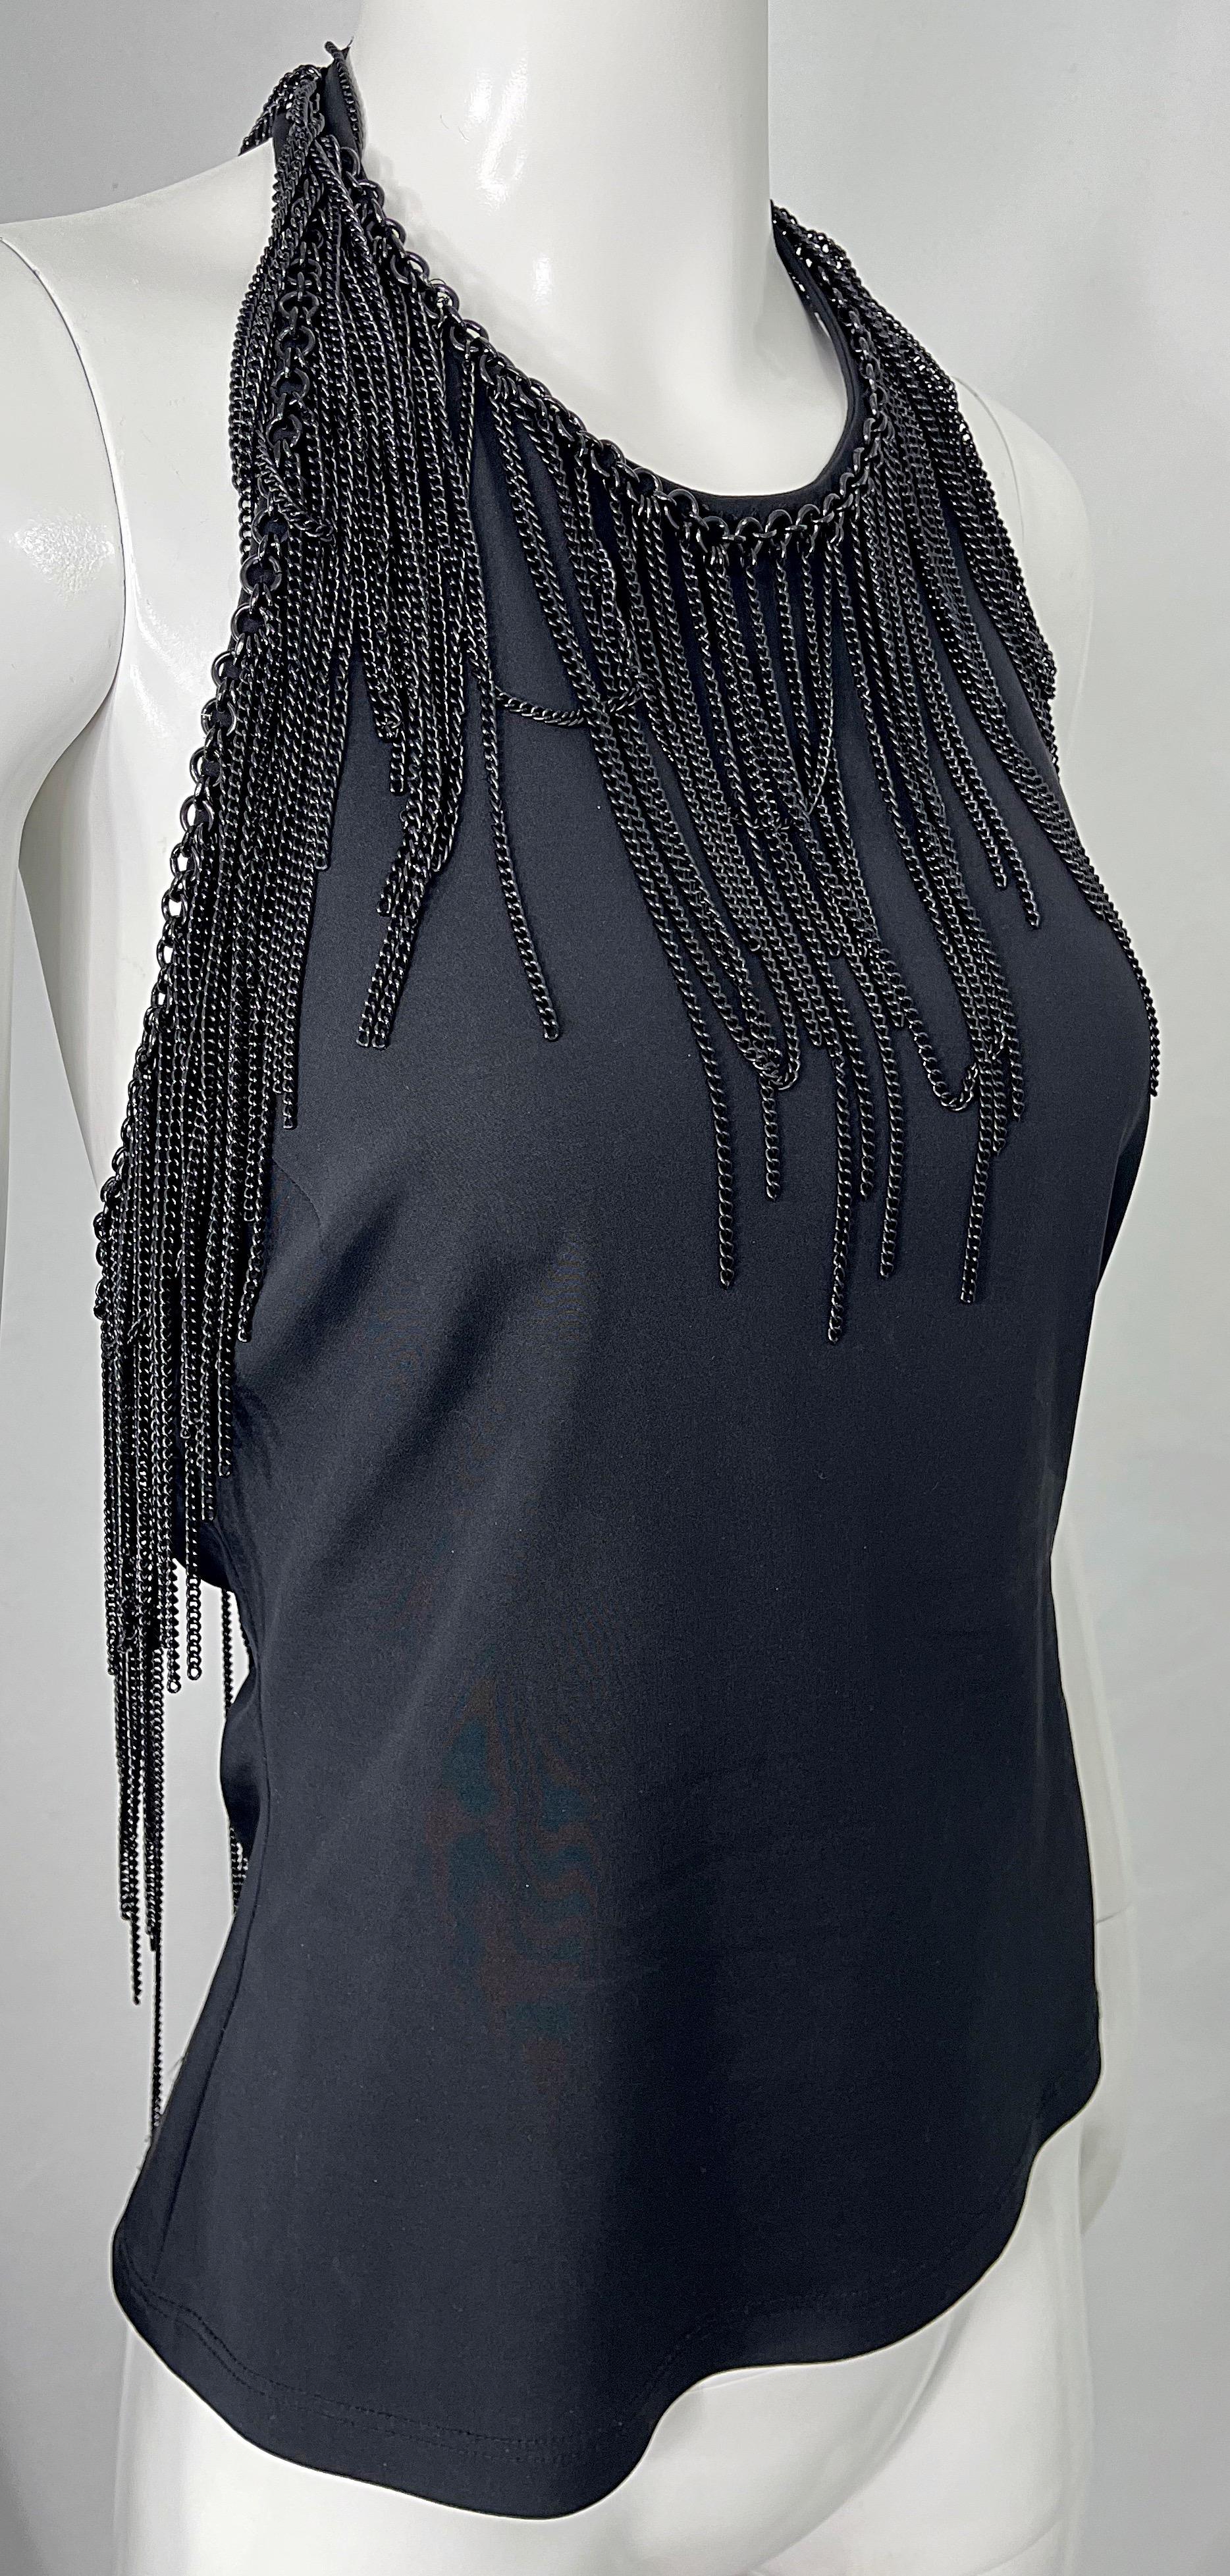 Gianni Versace 2000s Size 44 / 8 10 Black Chain Encrusted Y2K Halter Top Shirt  For Sale 3